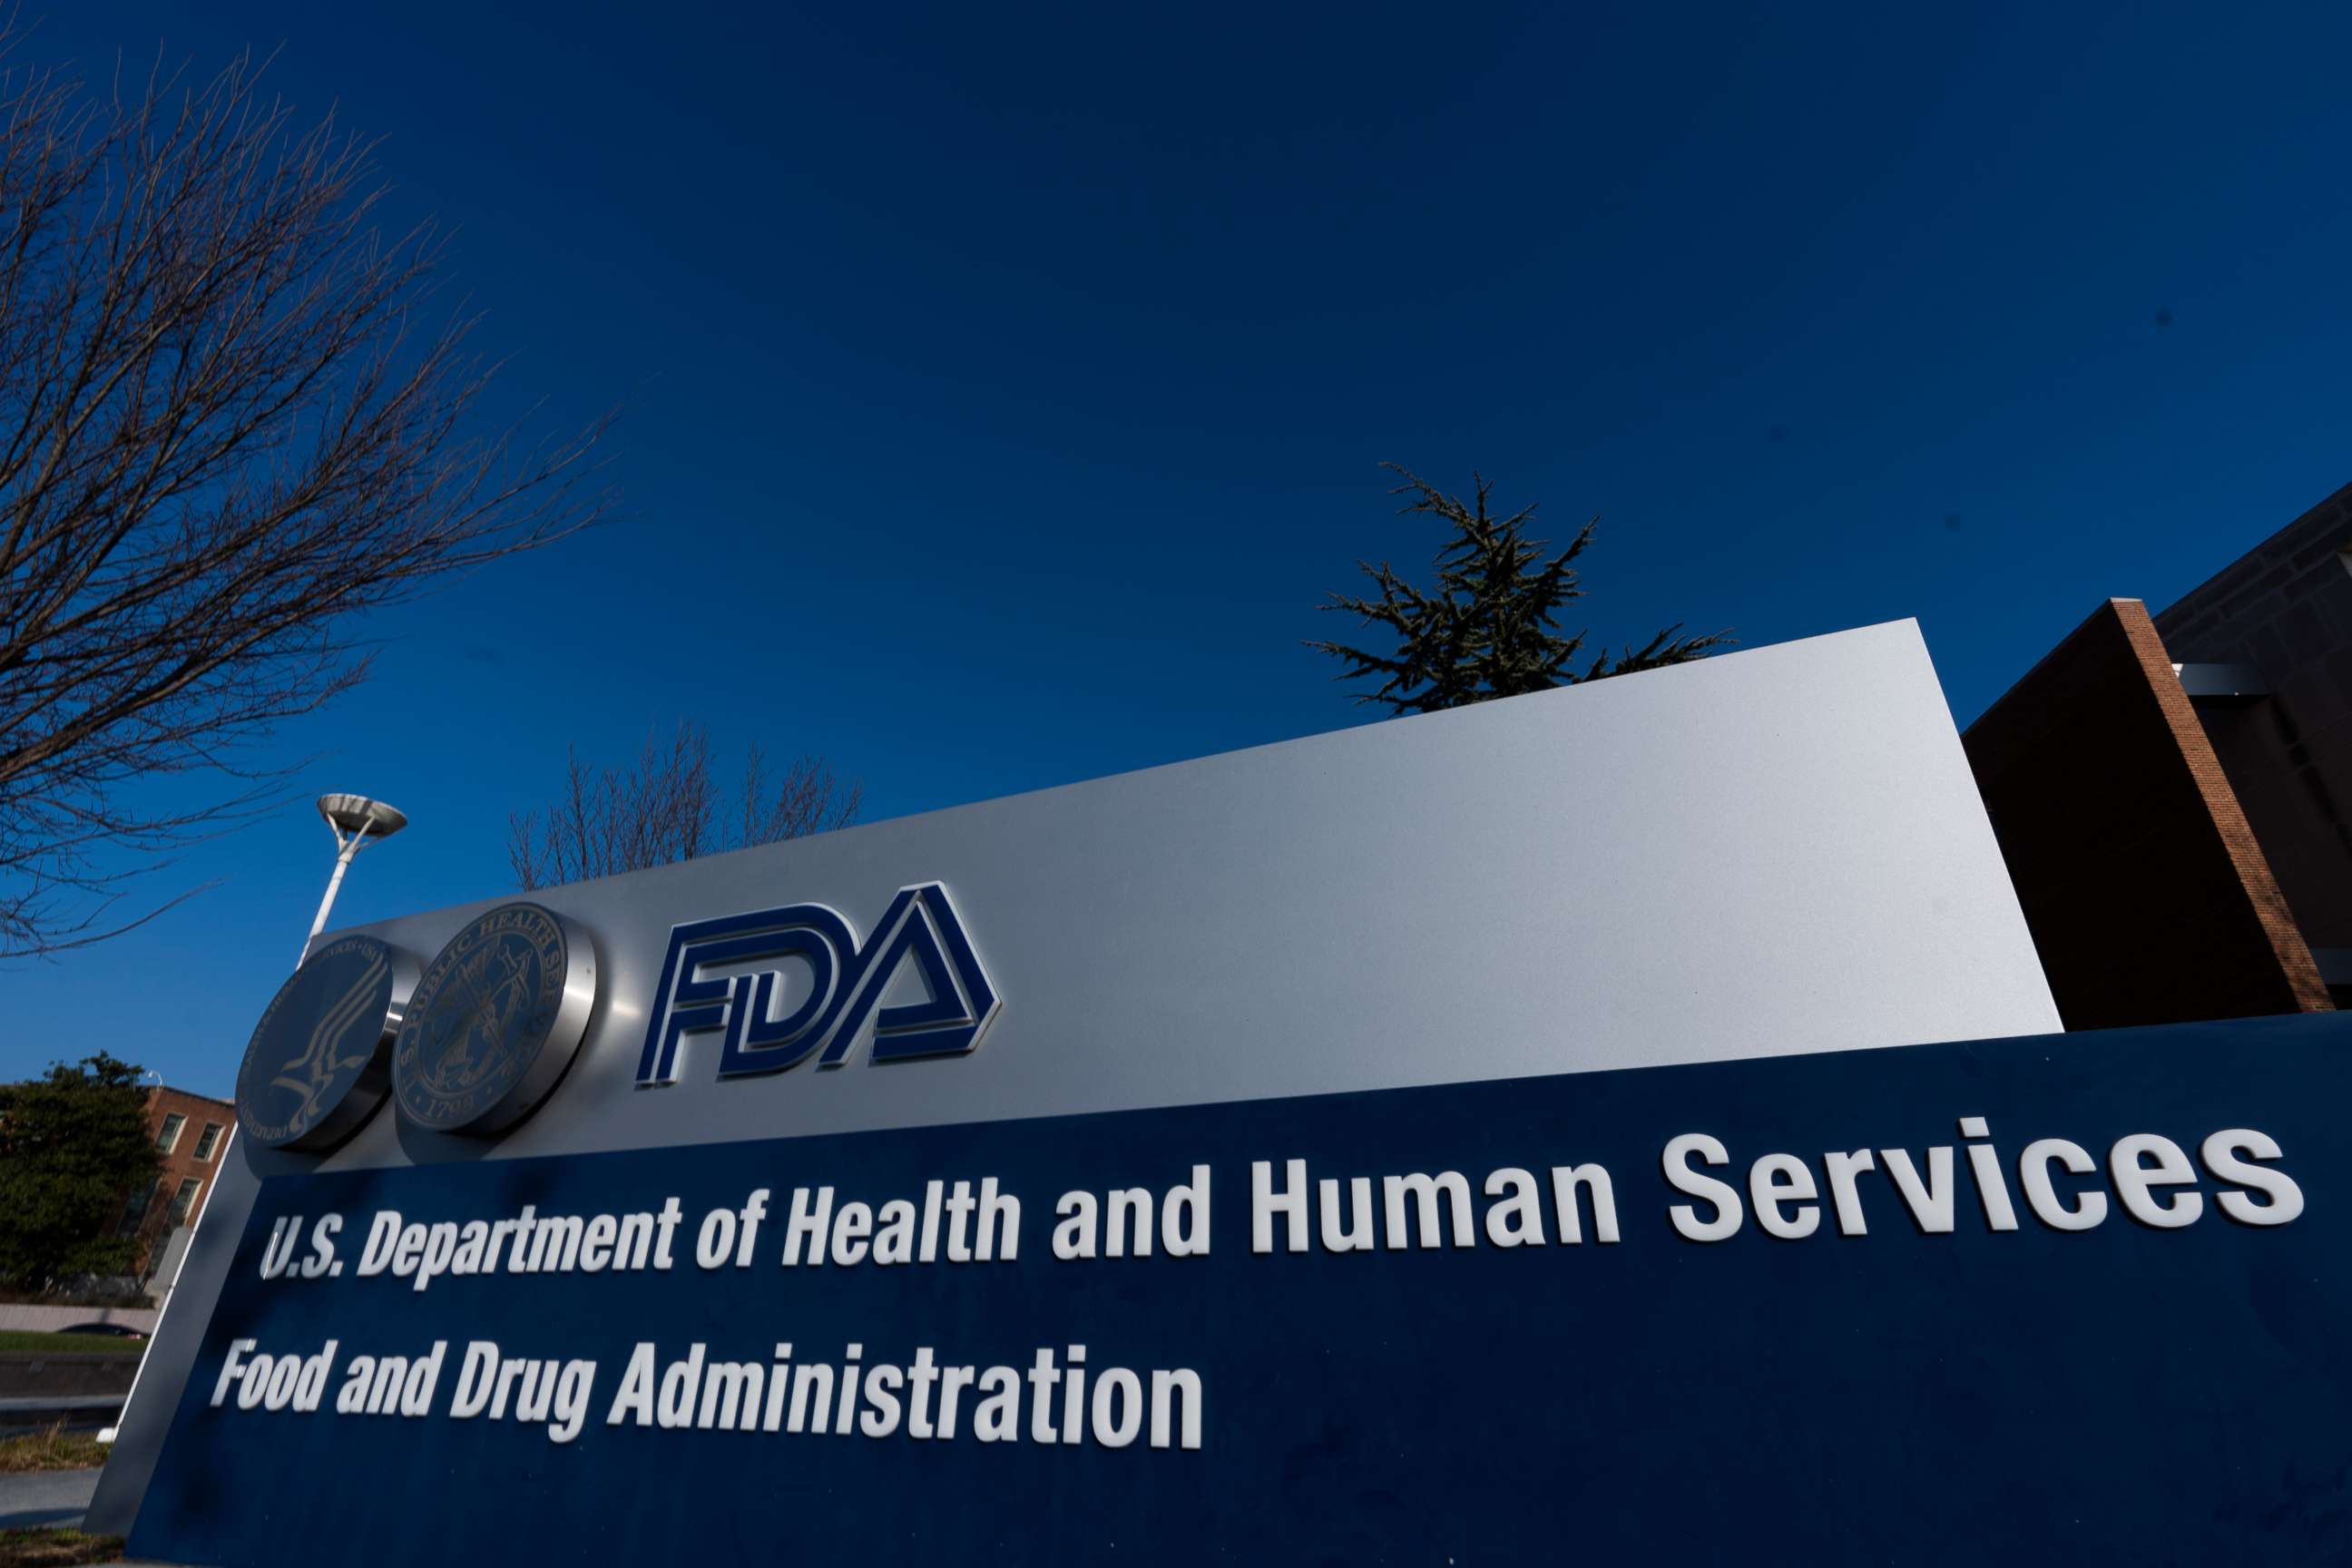 PHOTO: Food and Drug Administration building is shown Thursday, Dec. 10, 2020 in Silver Spring, Md. A U.S. government advisory panel convened on Thursday to decide whether to endorse mass use of Pfizer's COVID-19 vaccine.